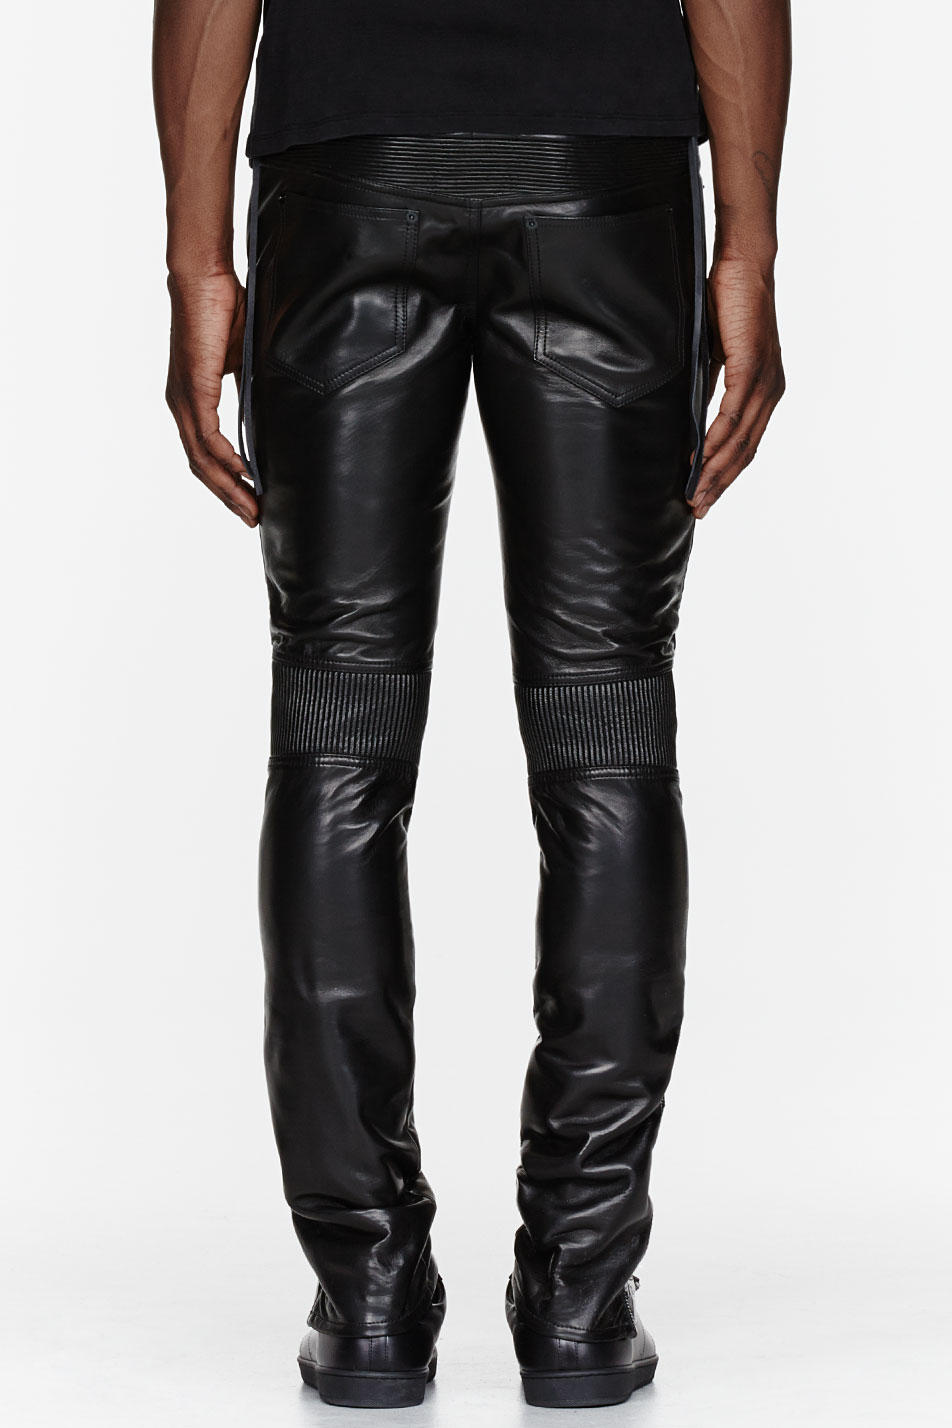 Lyst - Saint Laurent Black Leather Ribbed and Zippered Biker Pants in ...